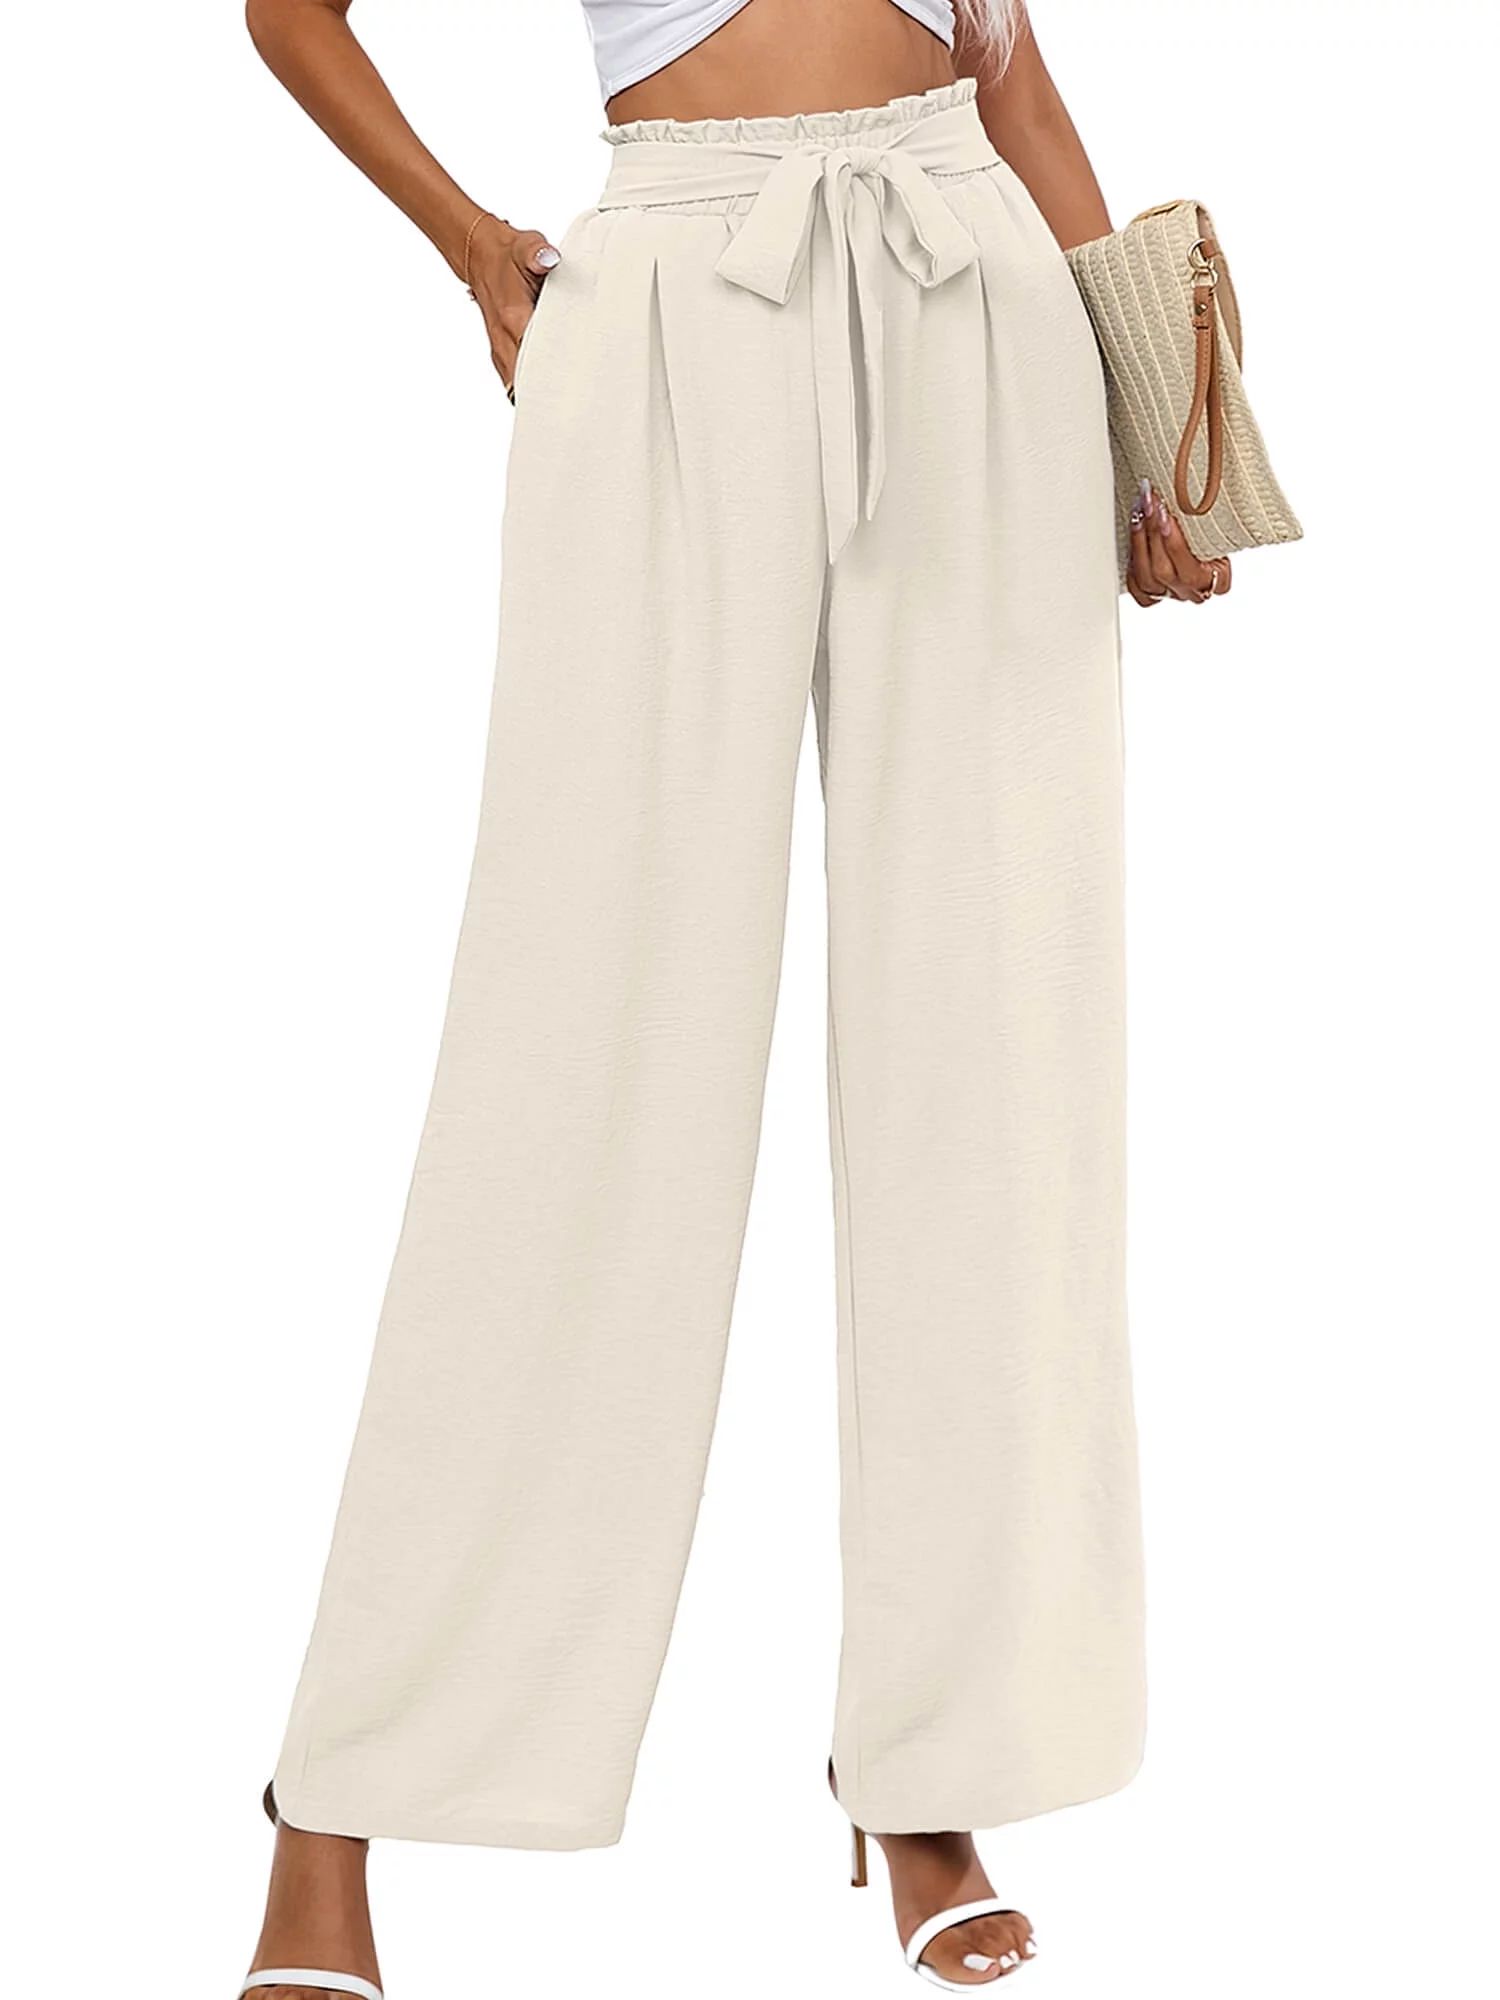 Chiclily Women Wide Leg Pants with Pockets High Waist Loose Belt Flowy Casual Trousers, US Size M... | Walmart (US)